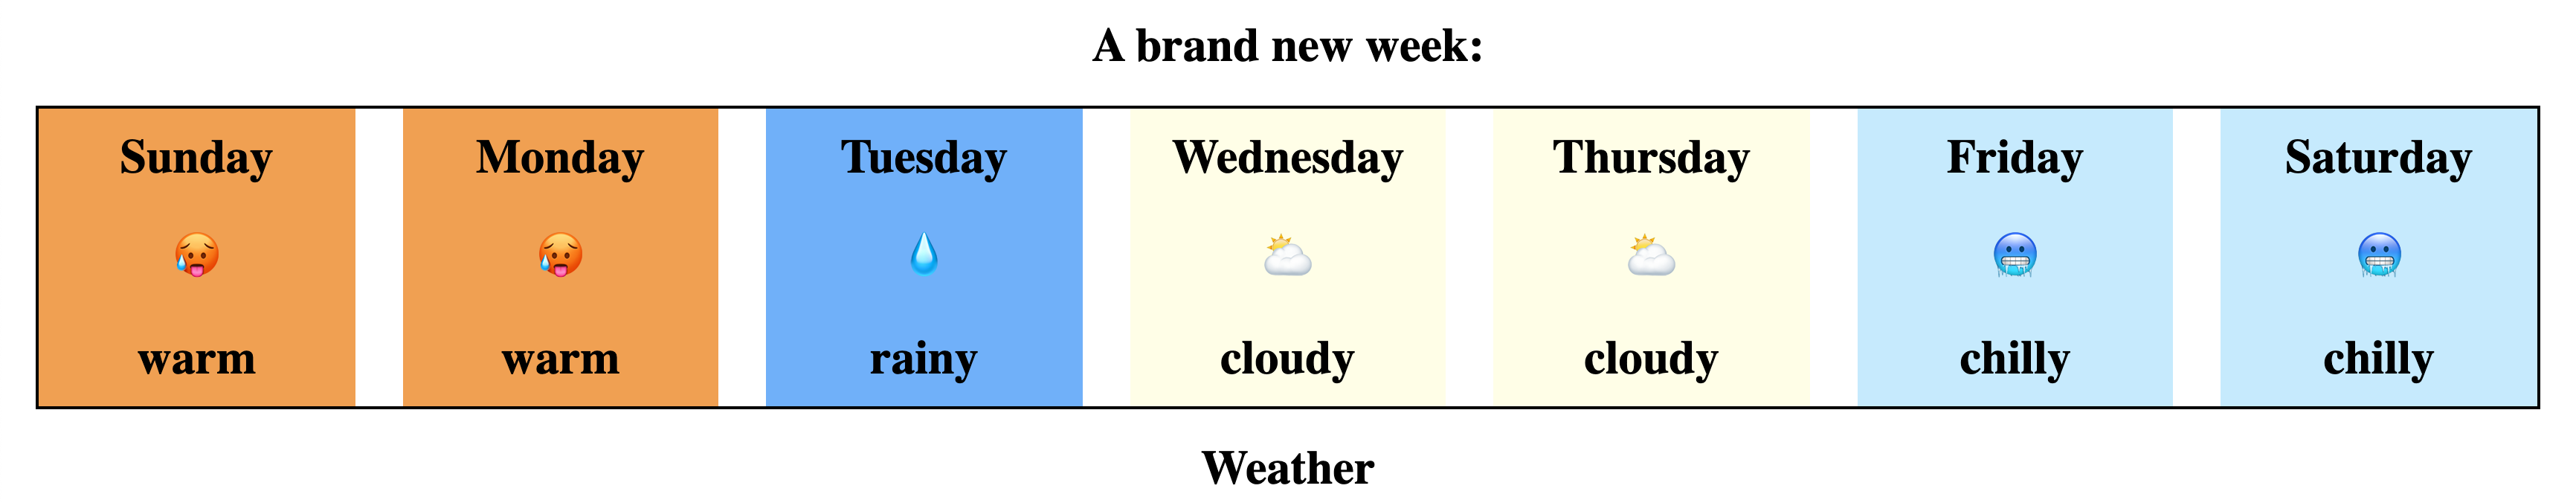 dashboard of weather each day of the week